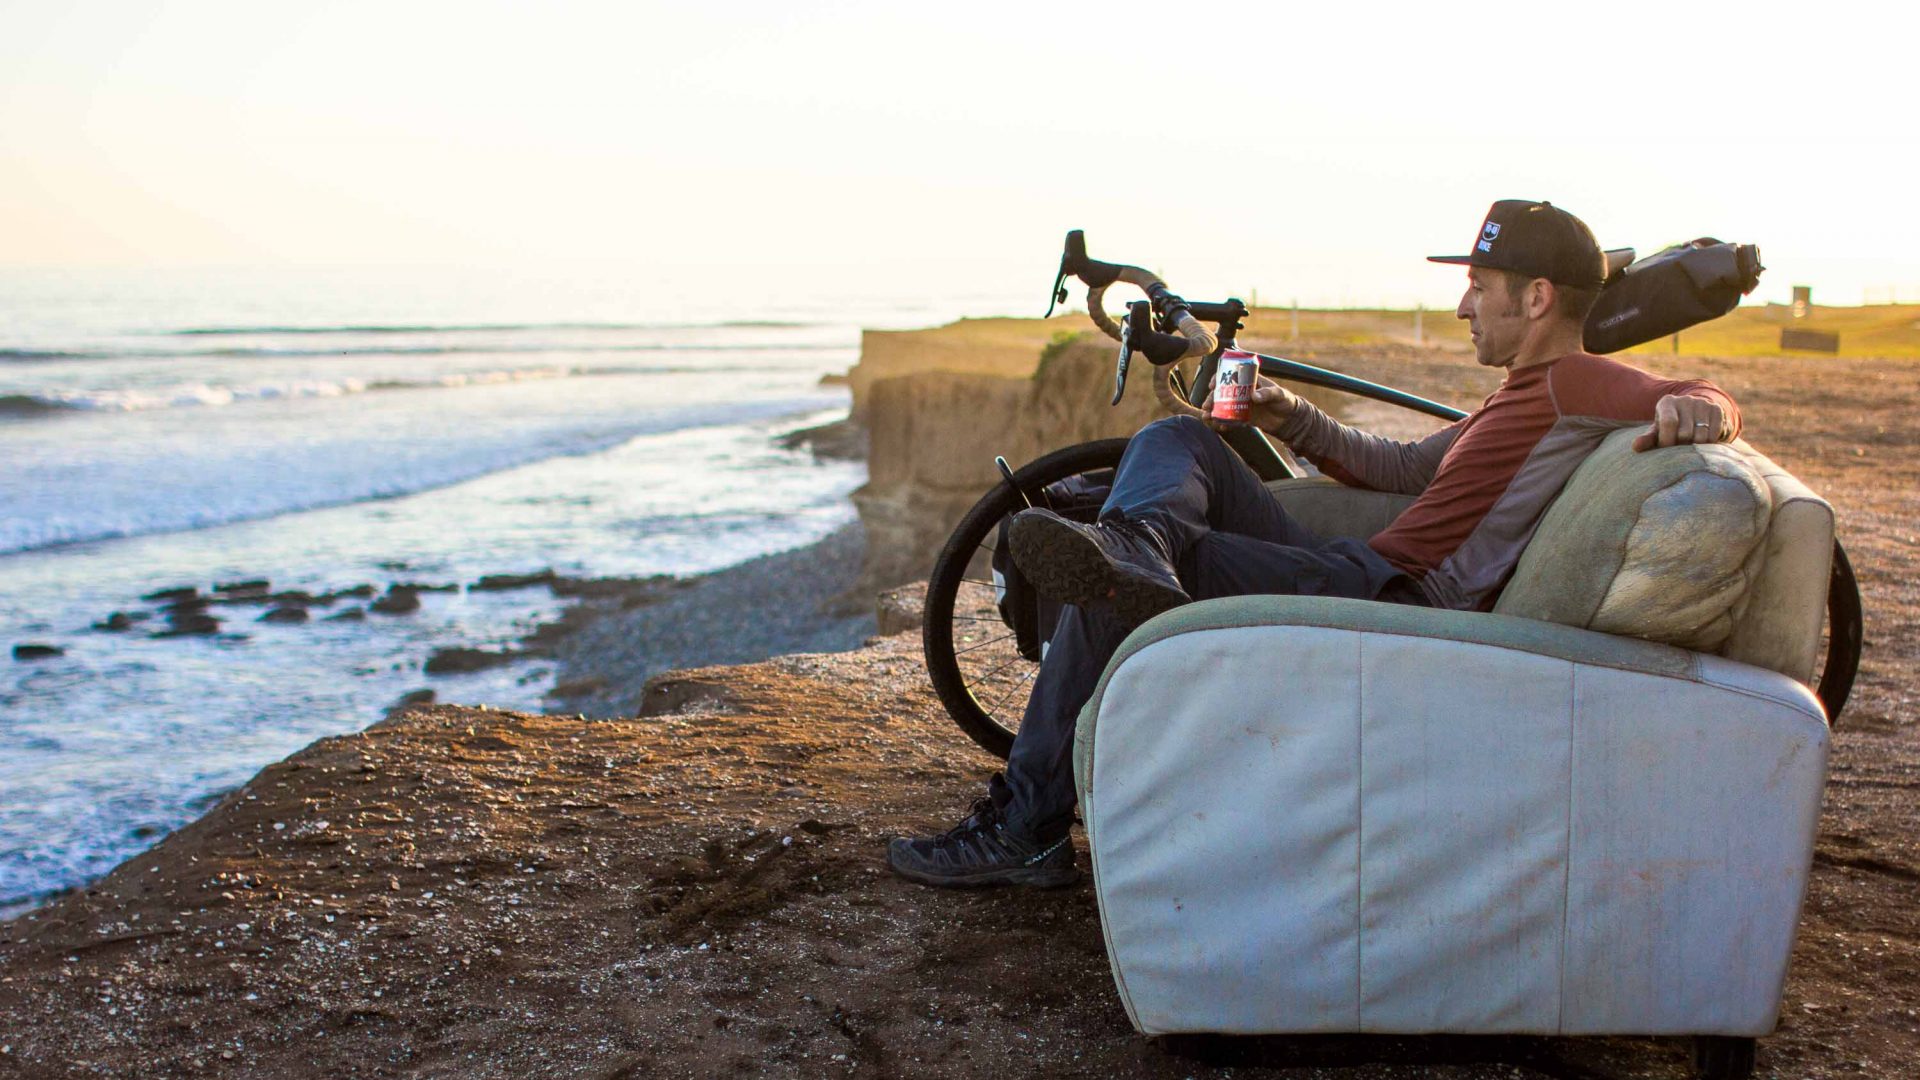 A man sits on a couch overlooking the ocean with his bicycle.